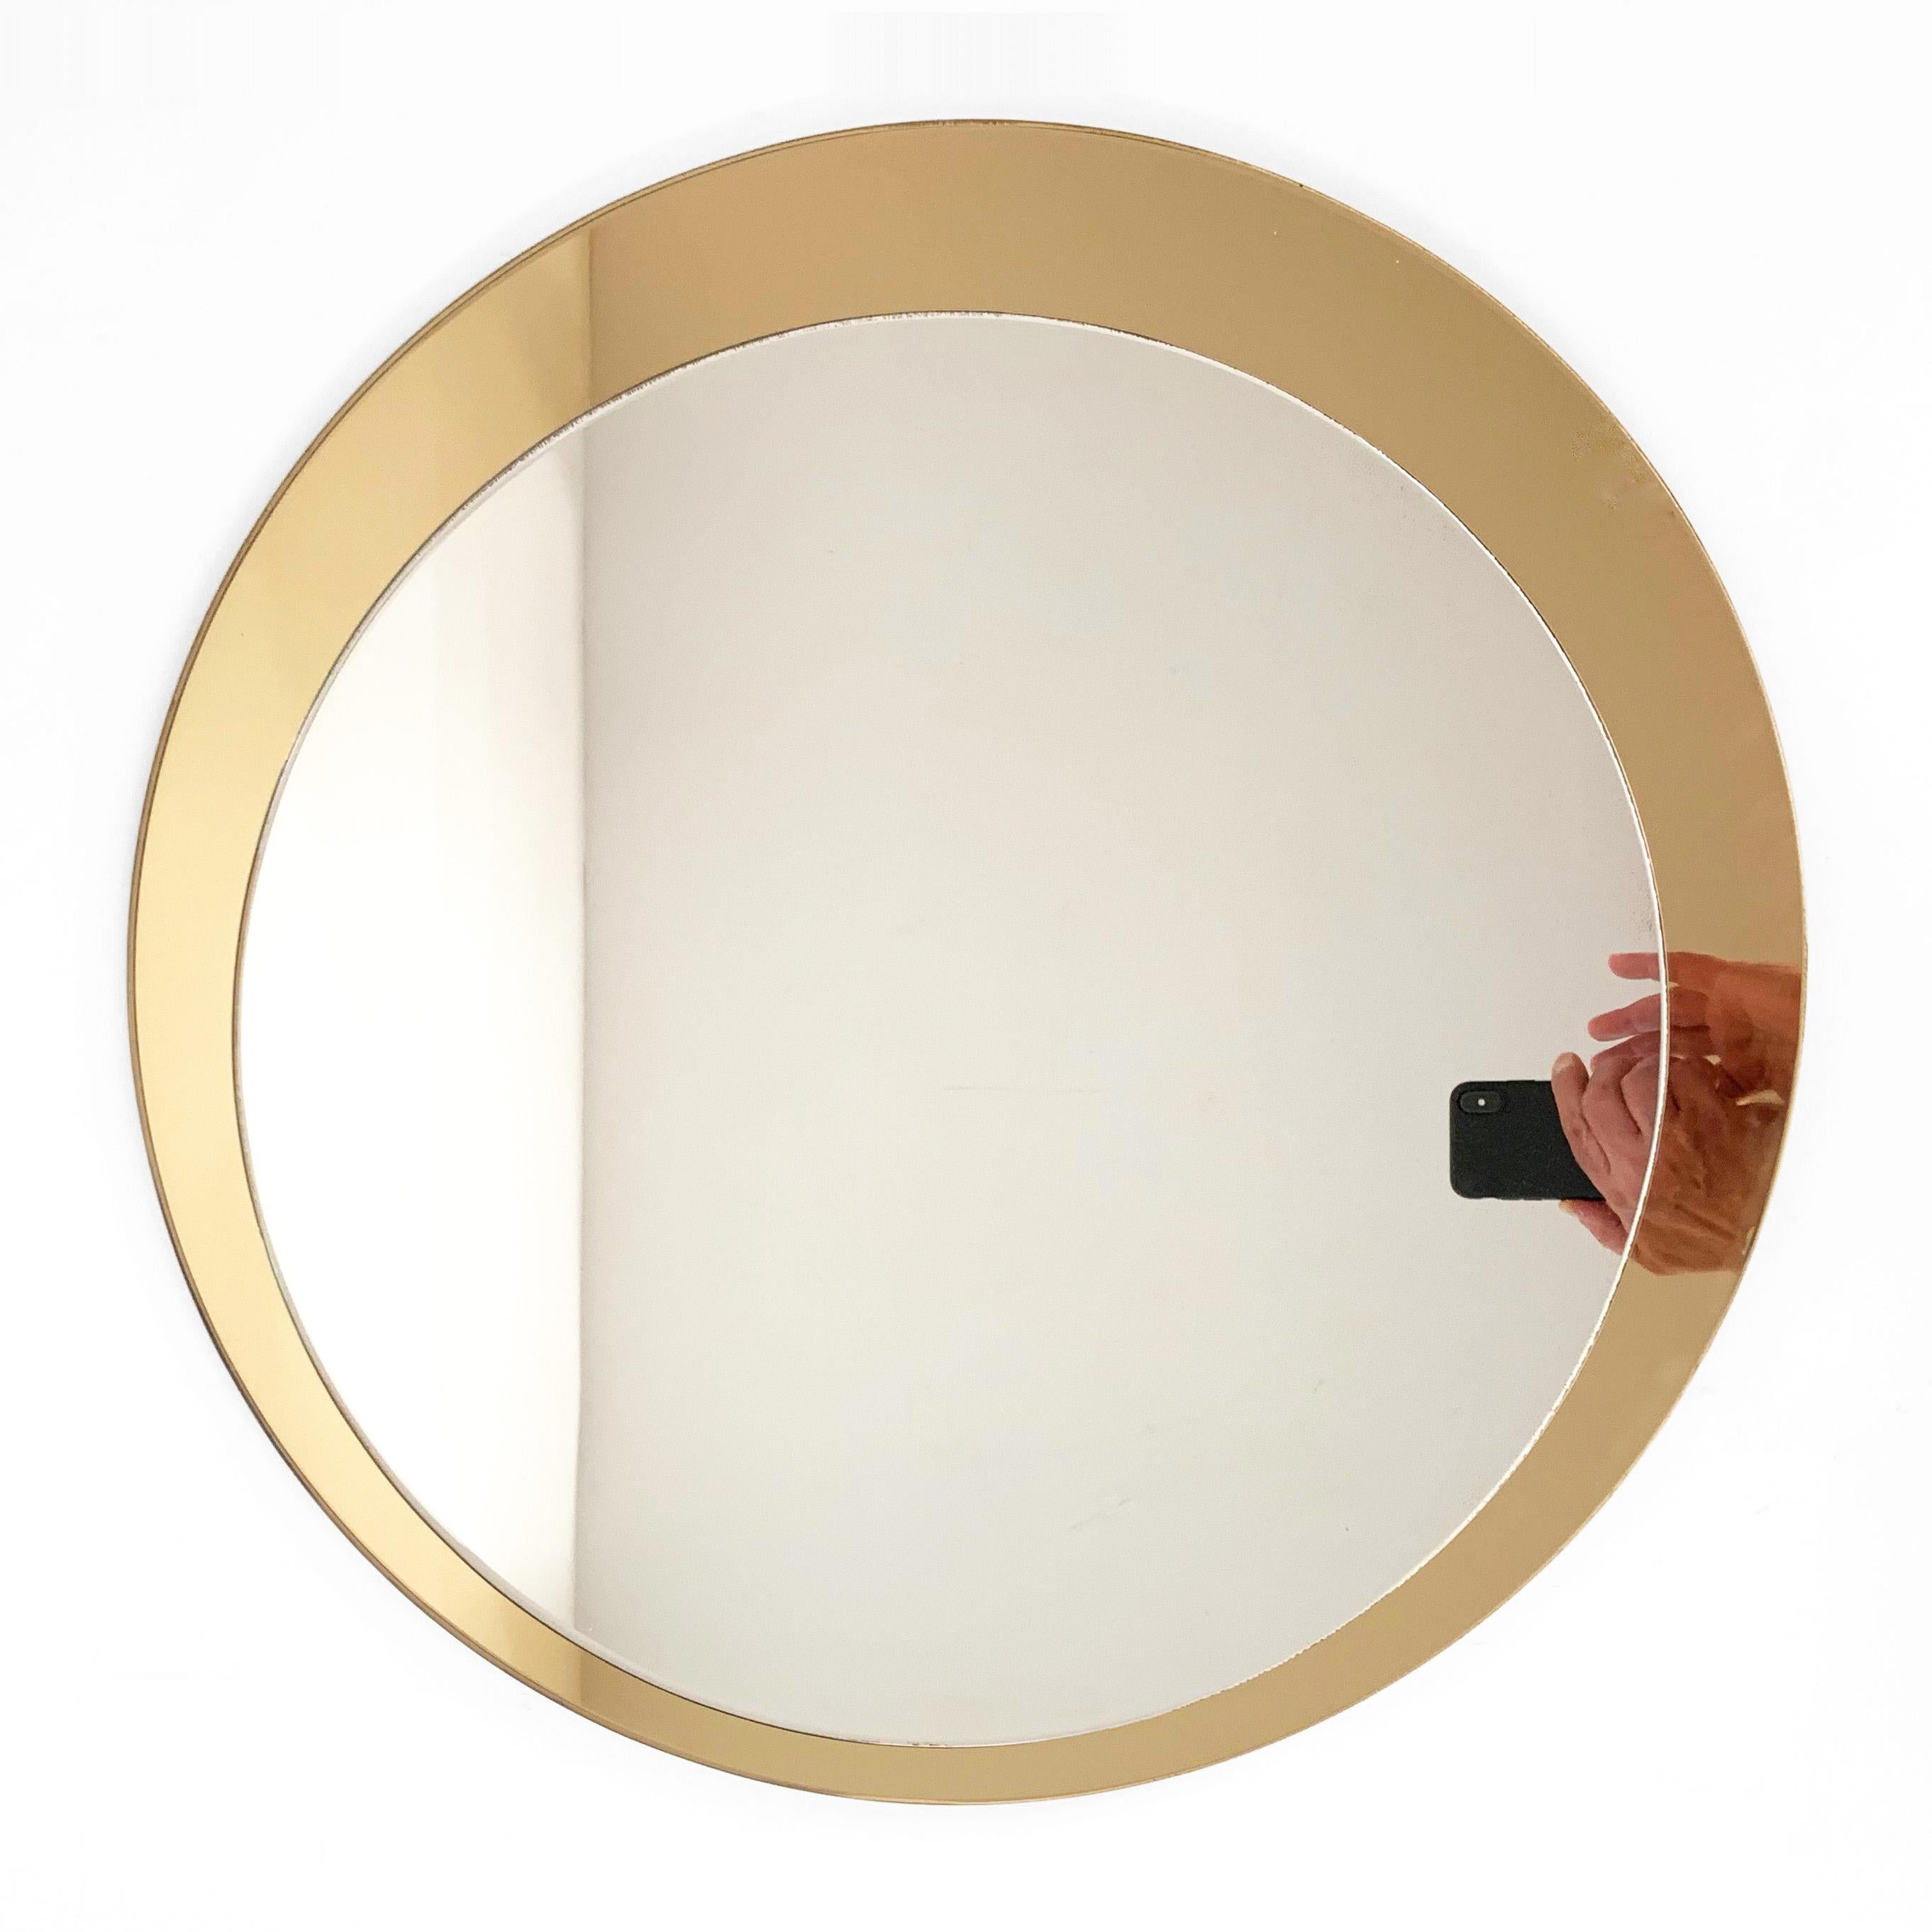 Galimberti Midcentury Italian Round Mirror with Double Brassed Gold Frame, 1975 For Sale 2